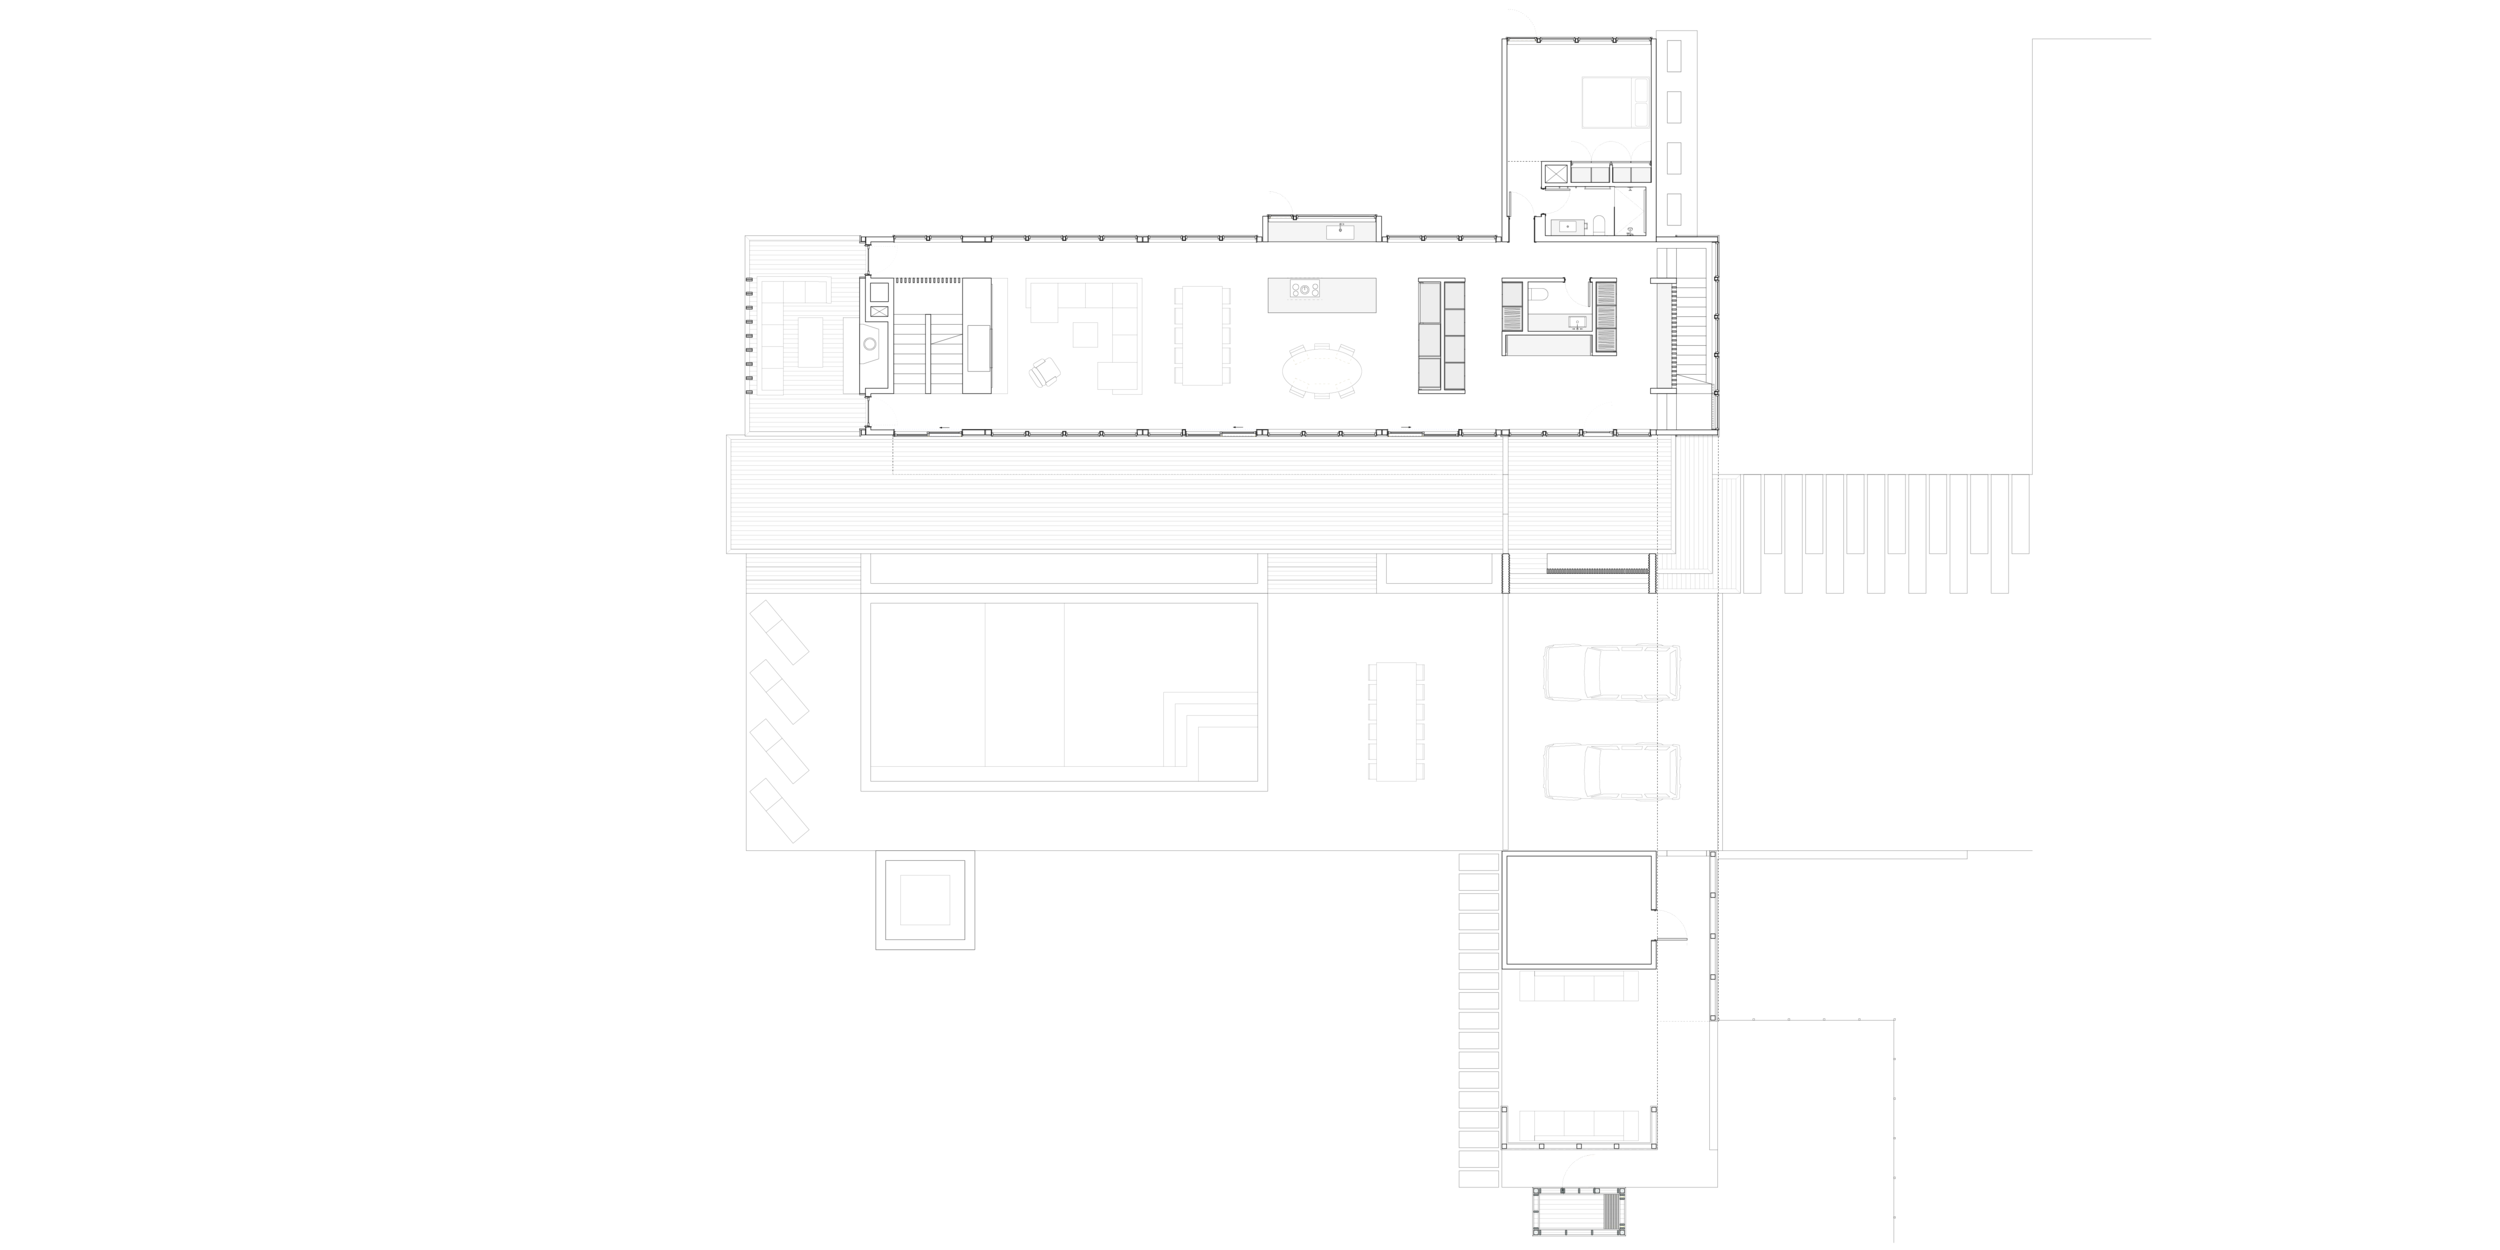 res4-resolution-4-architecture-modern-modular-great-oak-residence-prefab-home-plan-01-first floor.png